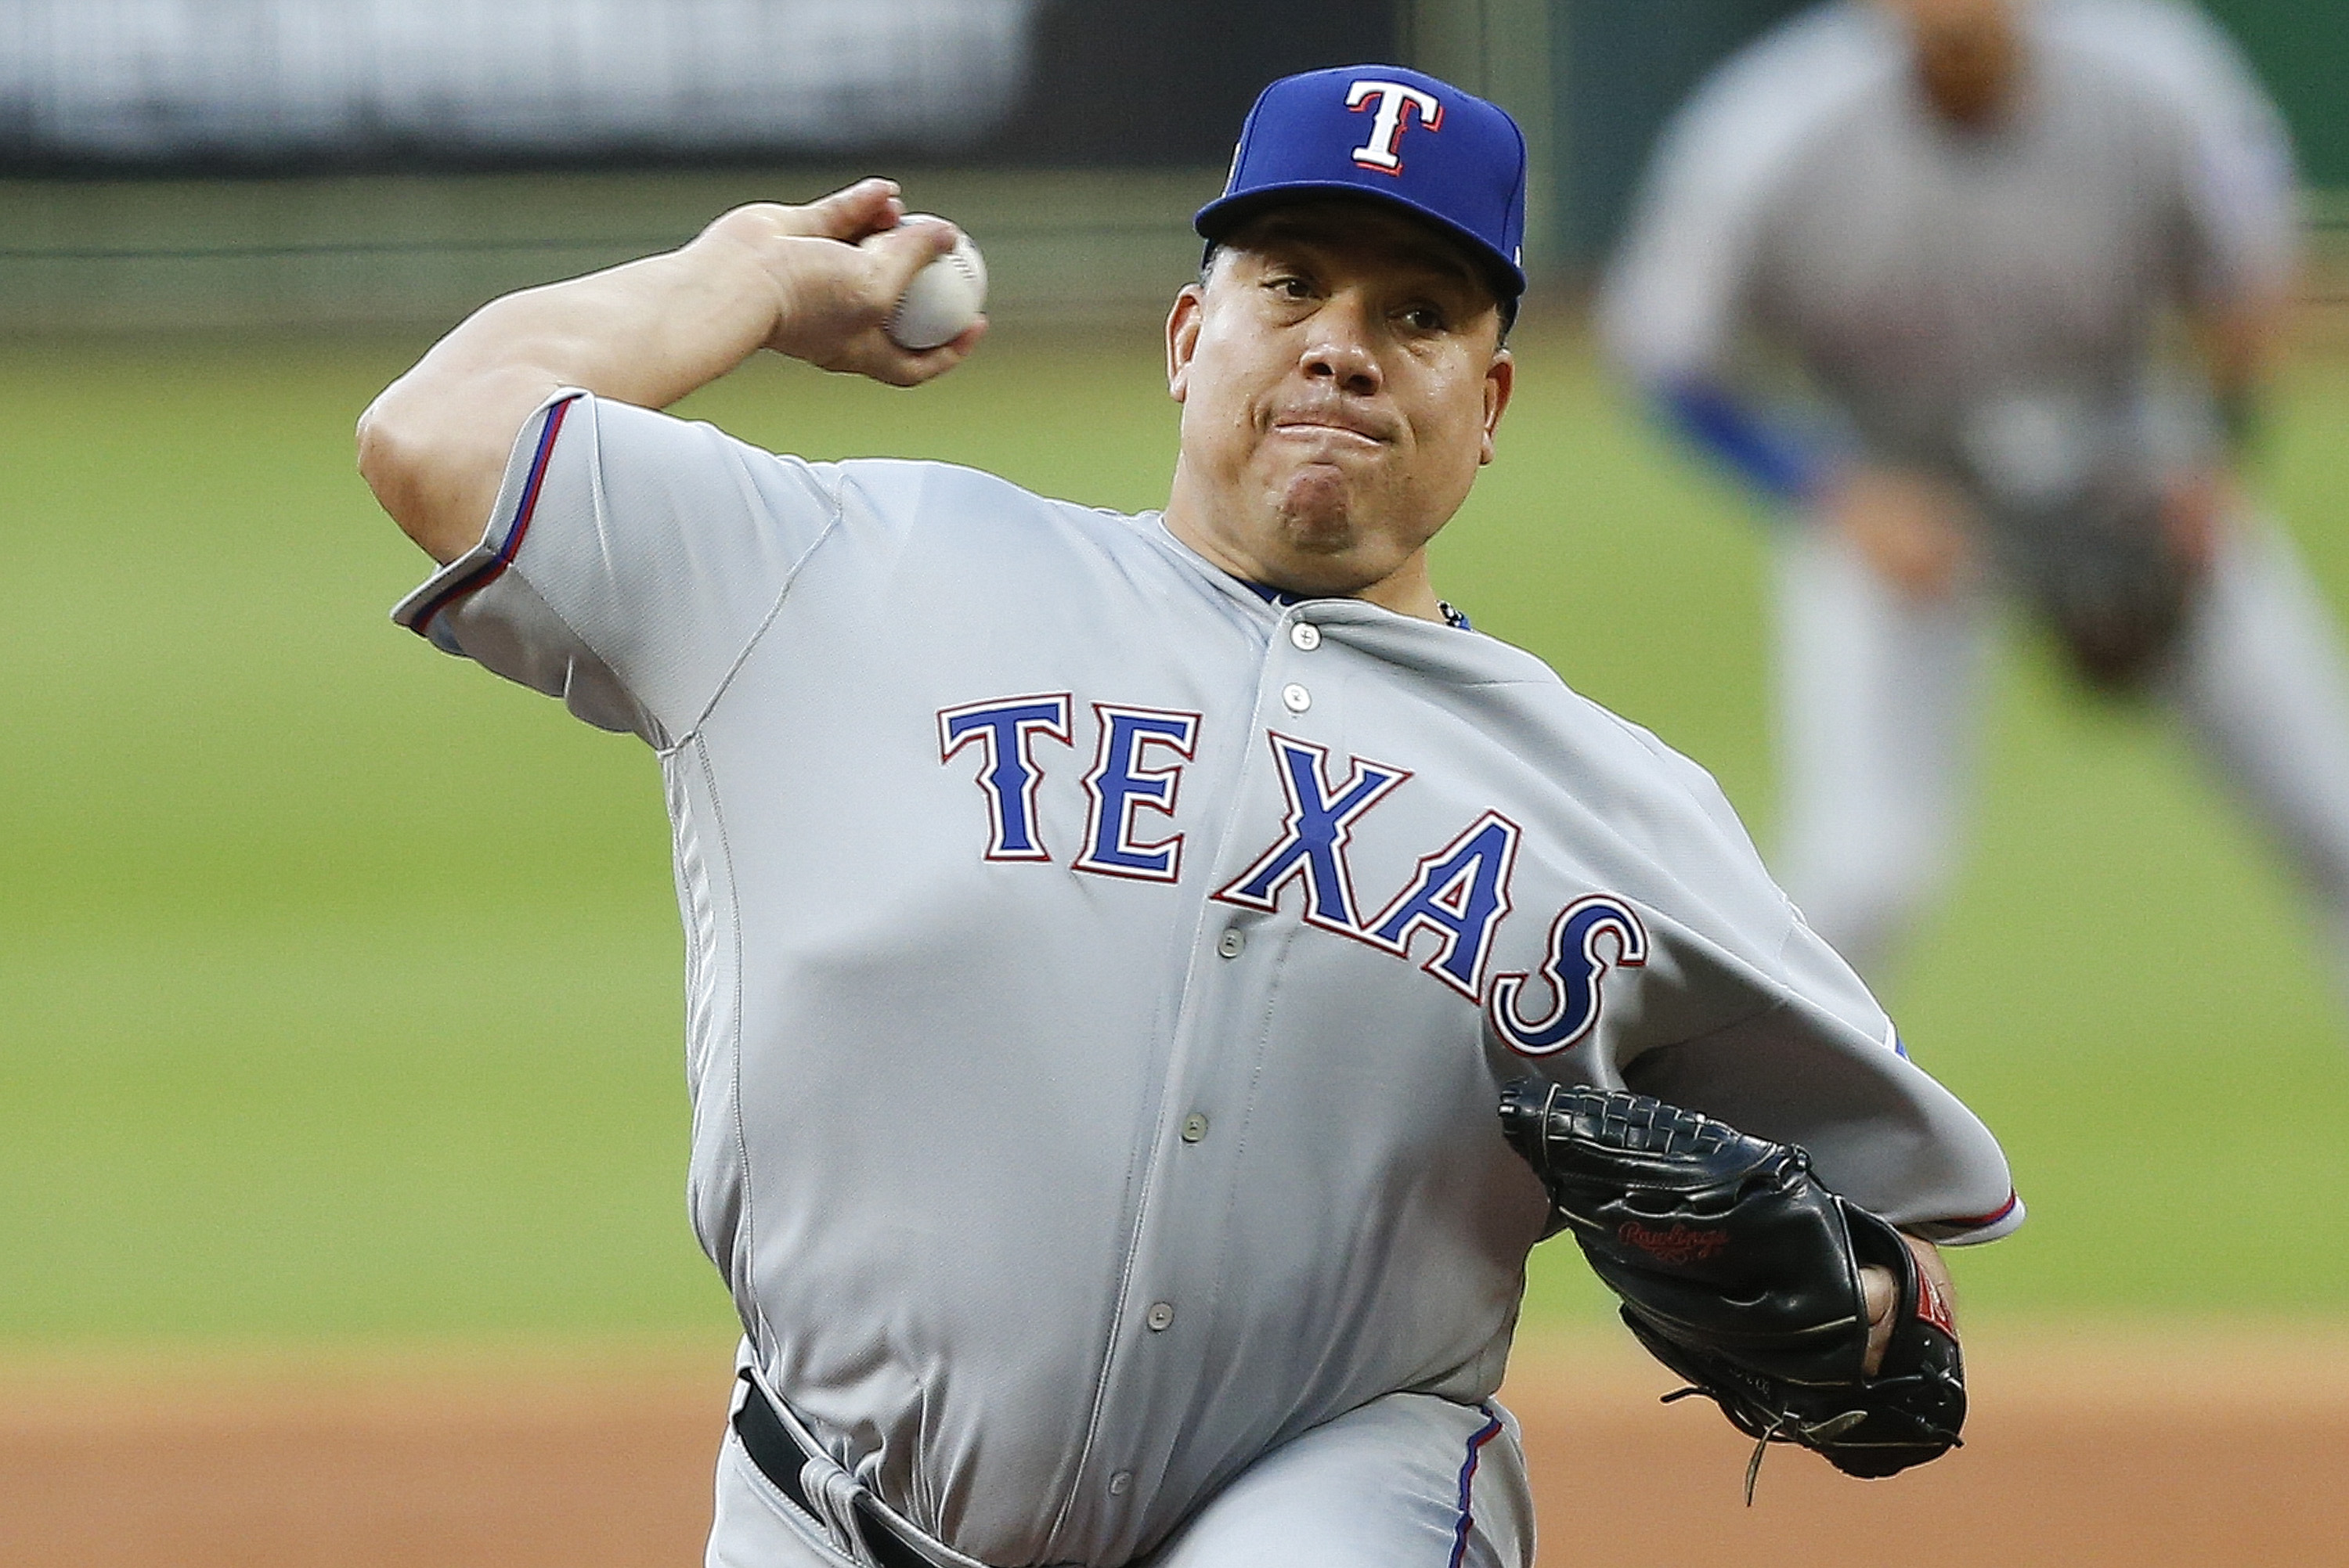 Bartolo Colón Threw a Complete Game at 48 Years of Age